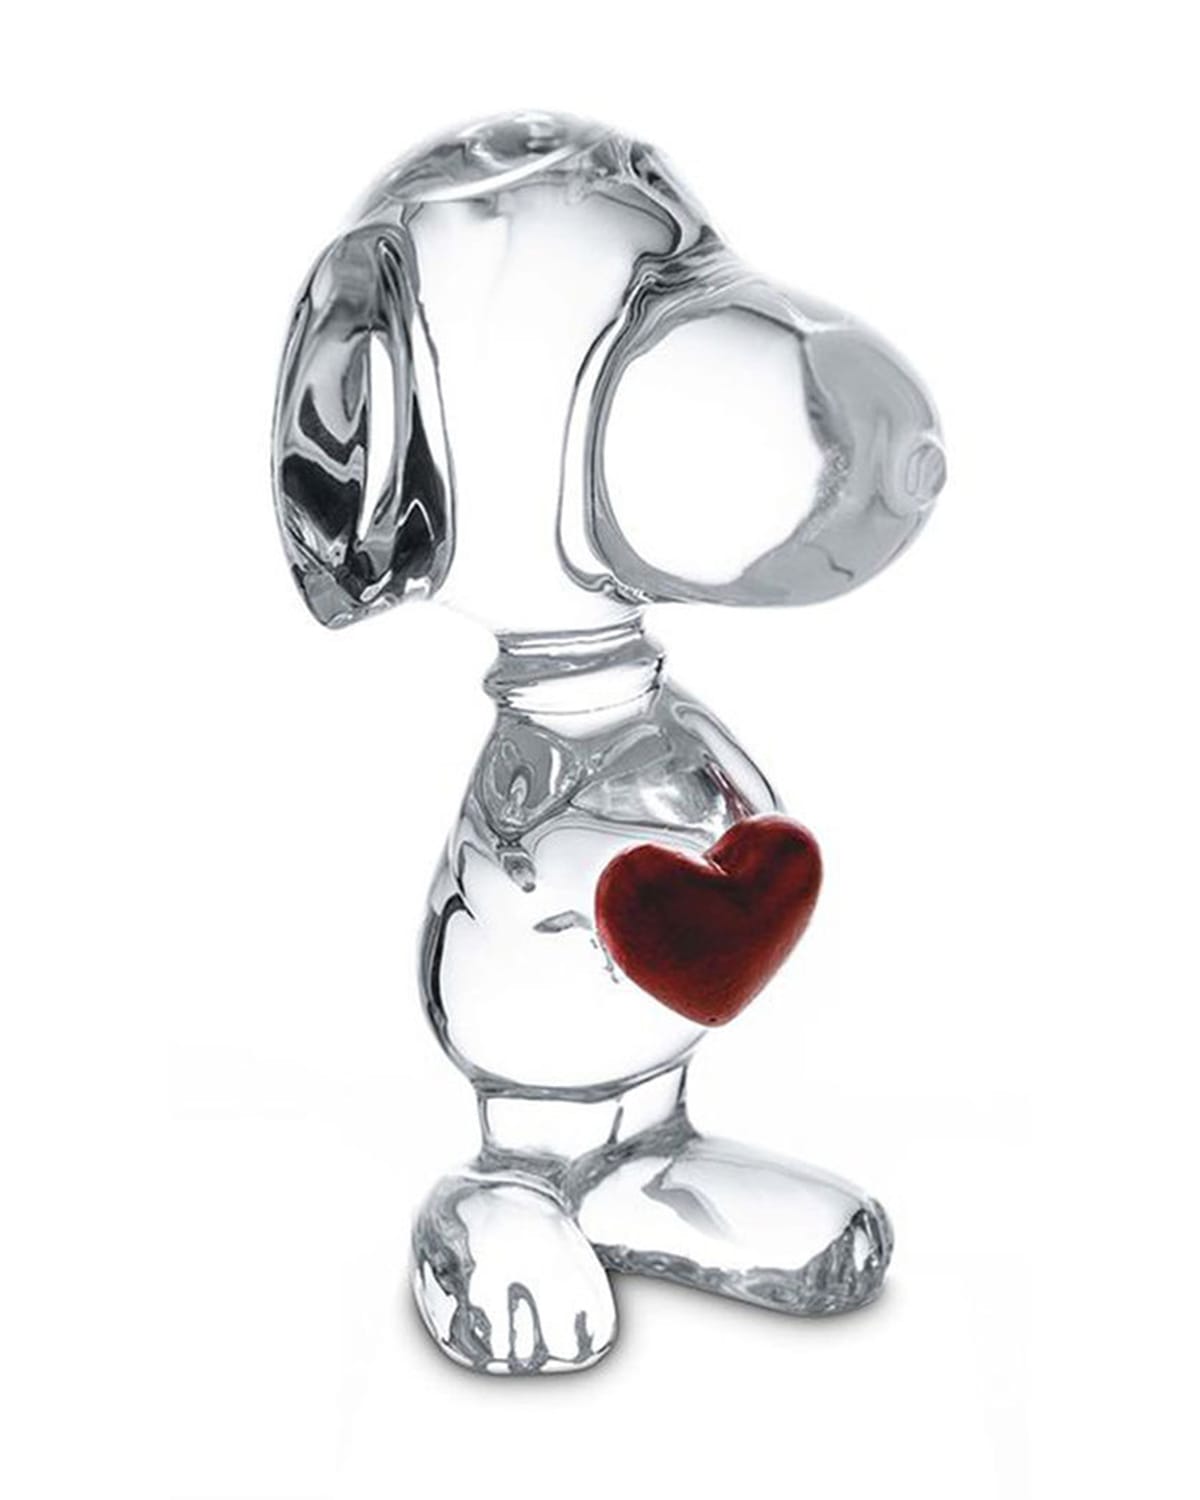 Baccarat Snoopy With Heart Figurine